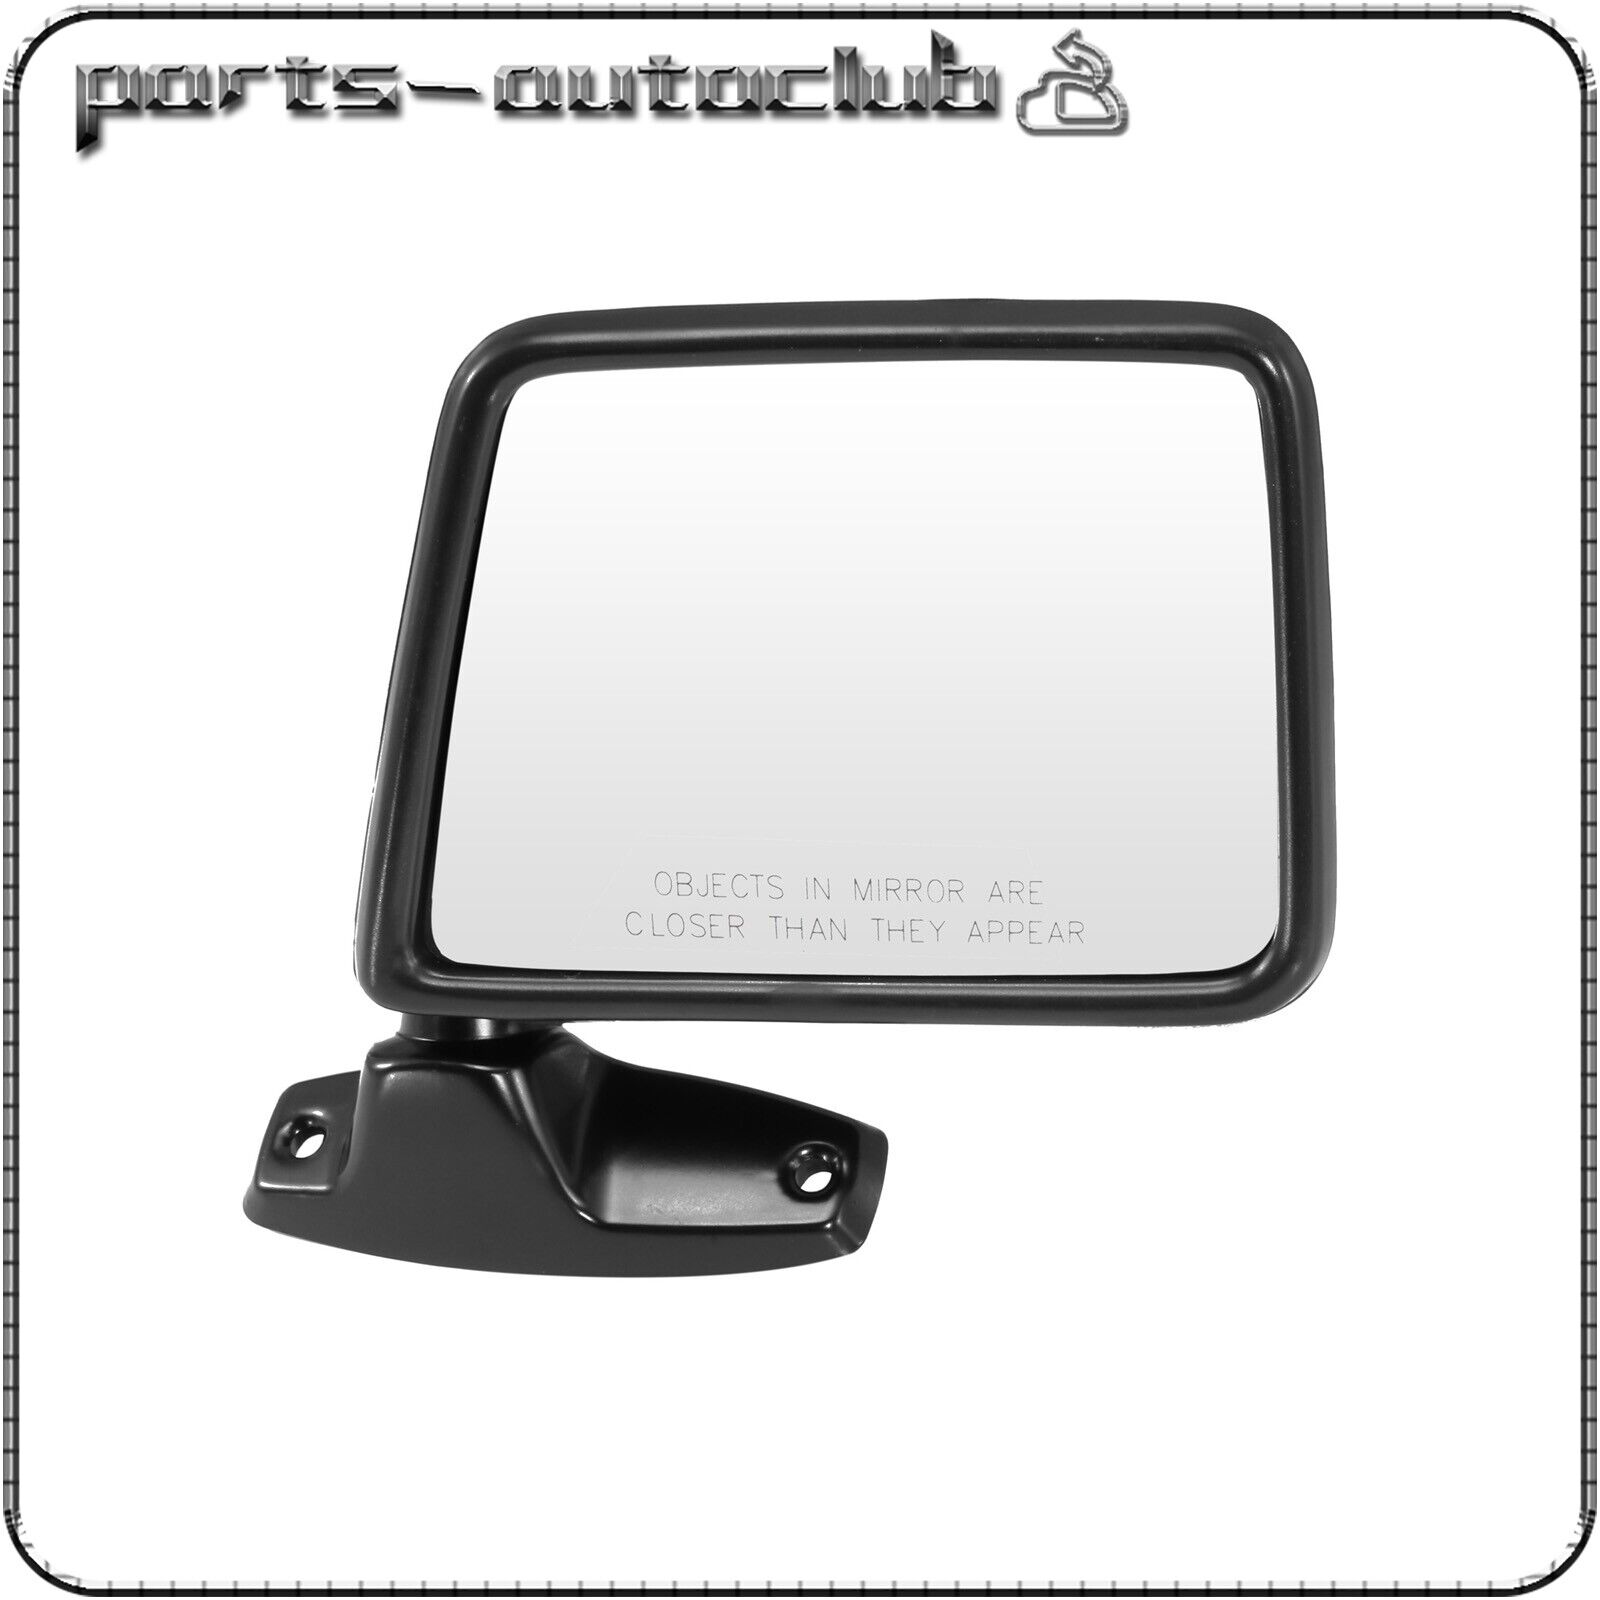 For 1983-1992 Ford RANGER BRONCO II Manual Foldaway Black Right Hand Side Mirror